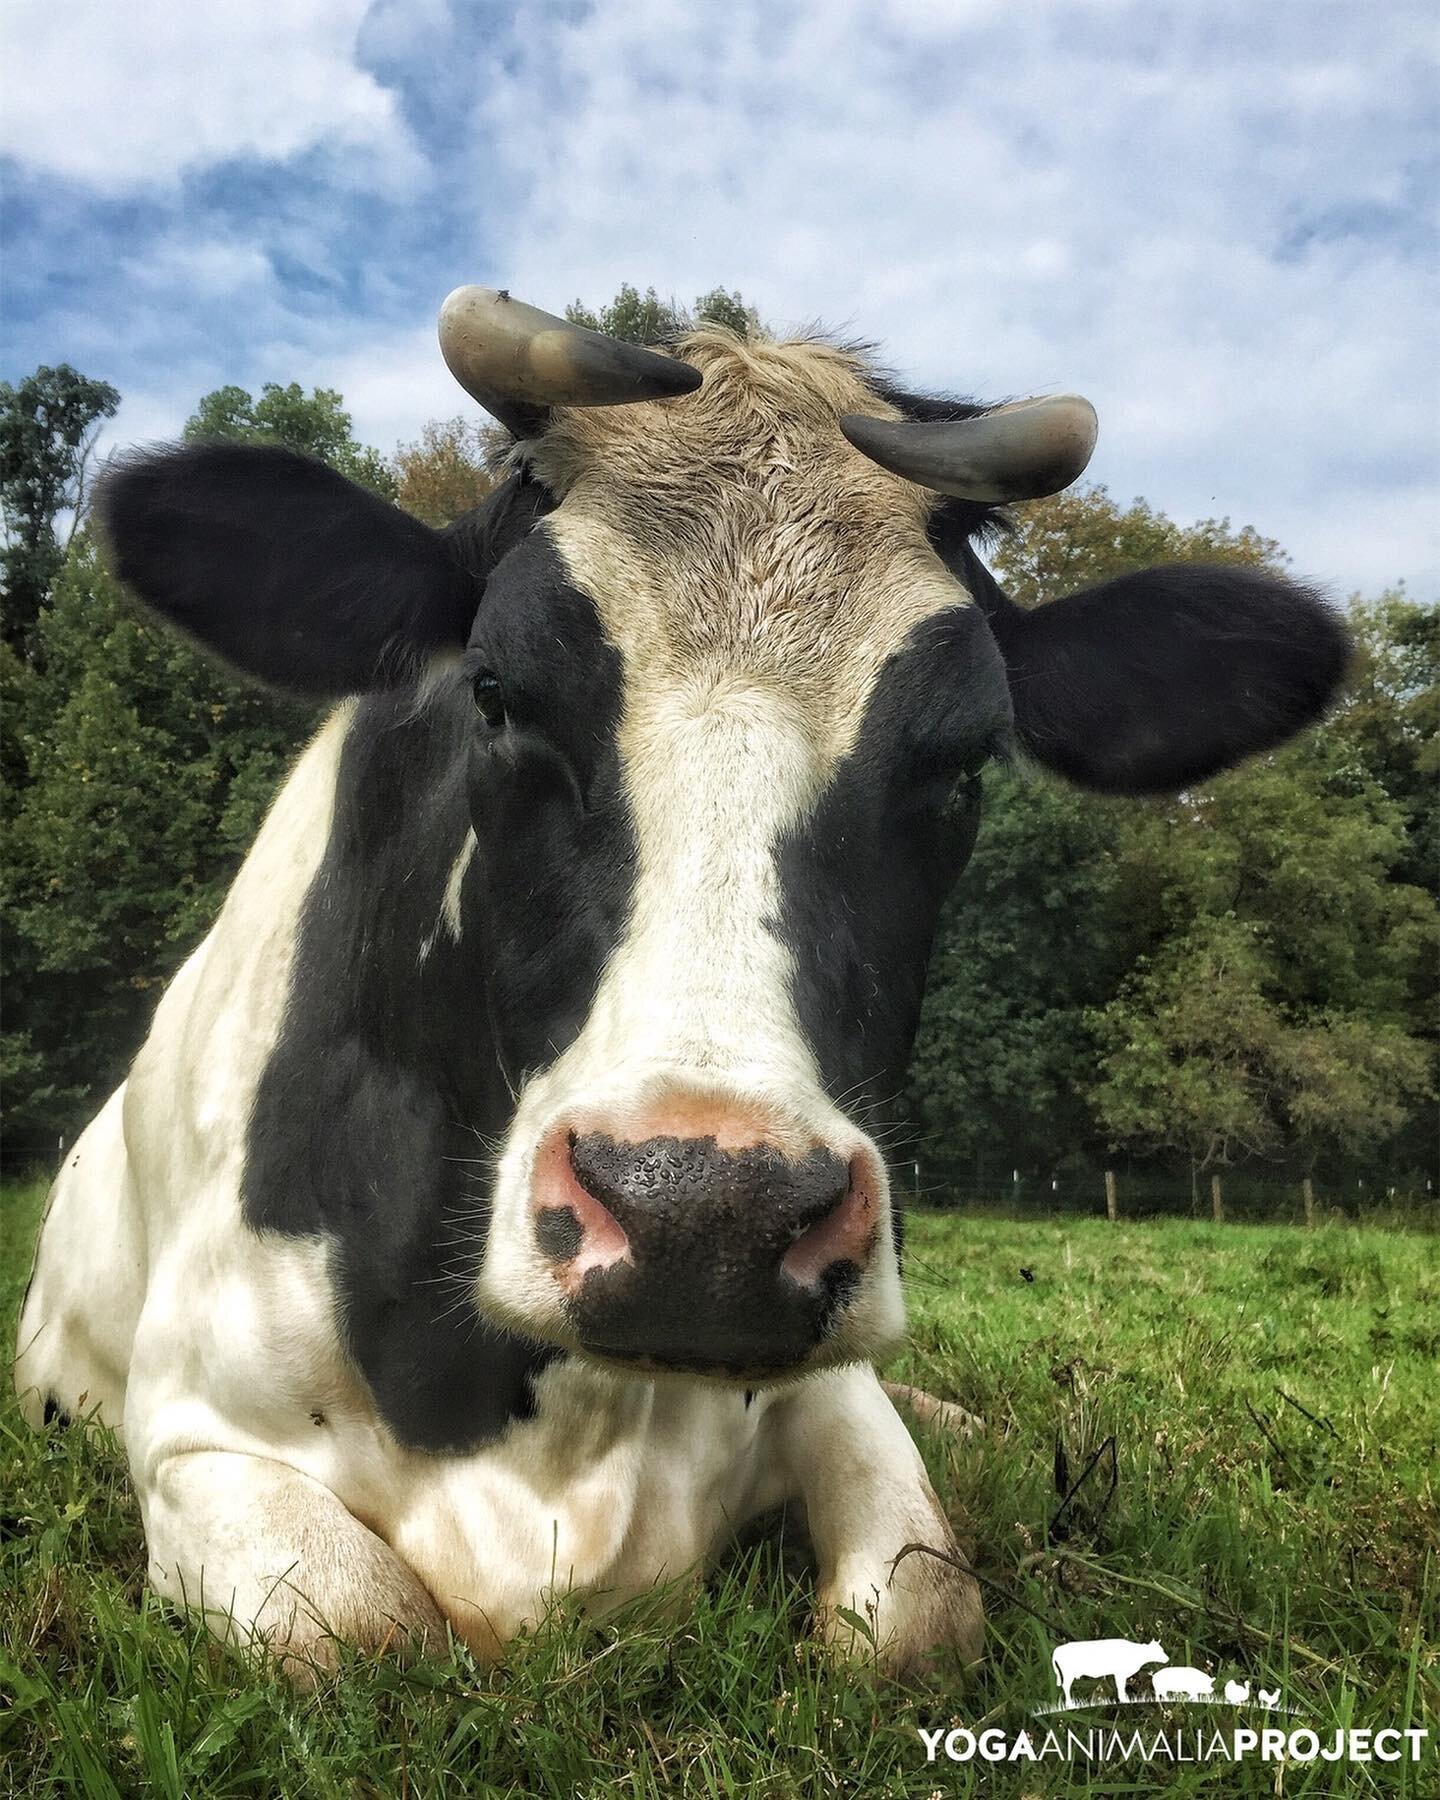 Yoga Animalia: Bovine - Gertie
Farmaste Animal Sanctuary, Lindstrom, Minnesota @farmastesanctuary 
I was so grateful to see Gertie again this past week. She has blossomed into her role as the doyenne of the cattle herd, and has grown more regal with 